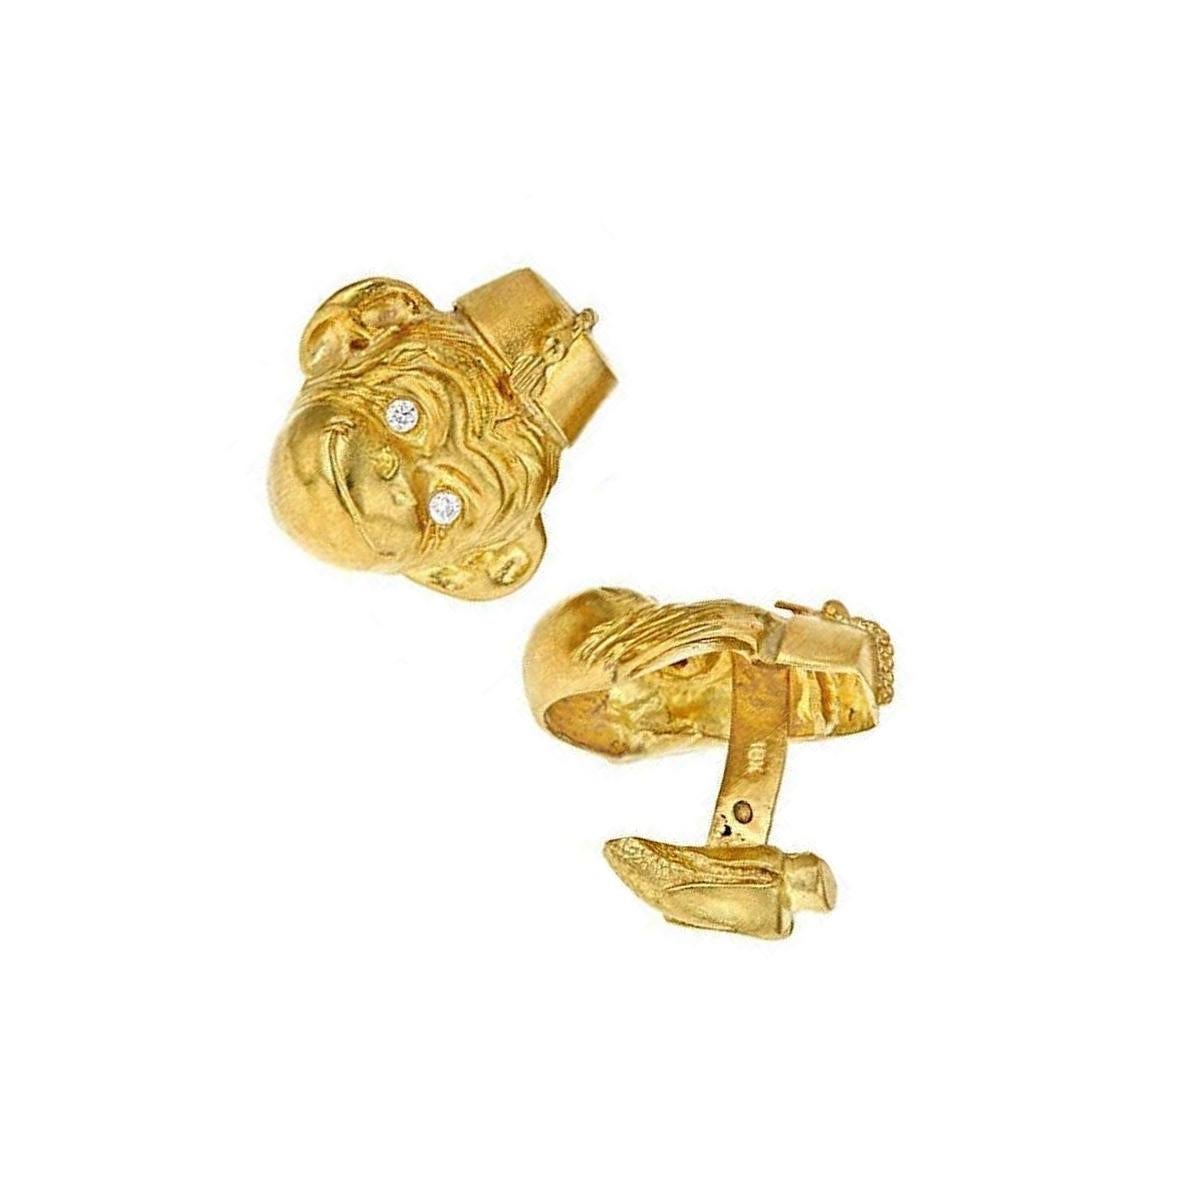 Diamond Eyes 18 Karat Gold SMALL MONKEY IN HAT Cufflinks by John Landrum Bryant In New Condition For Sale In New York, NY